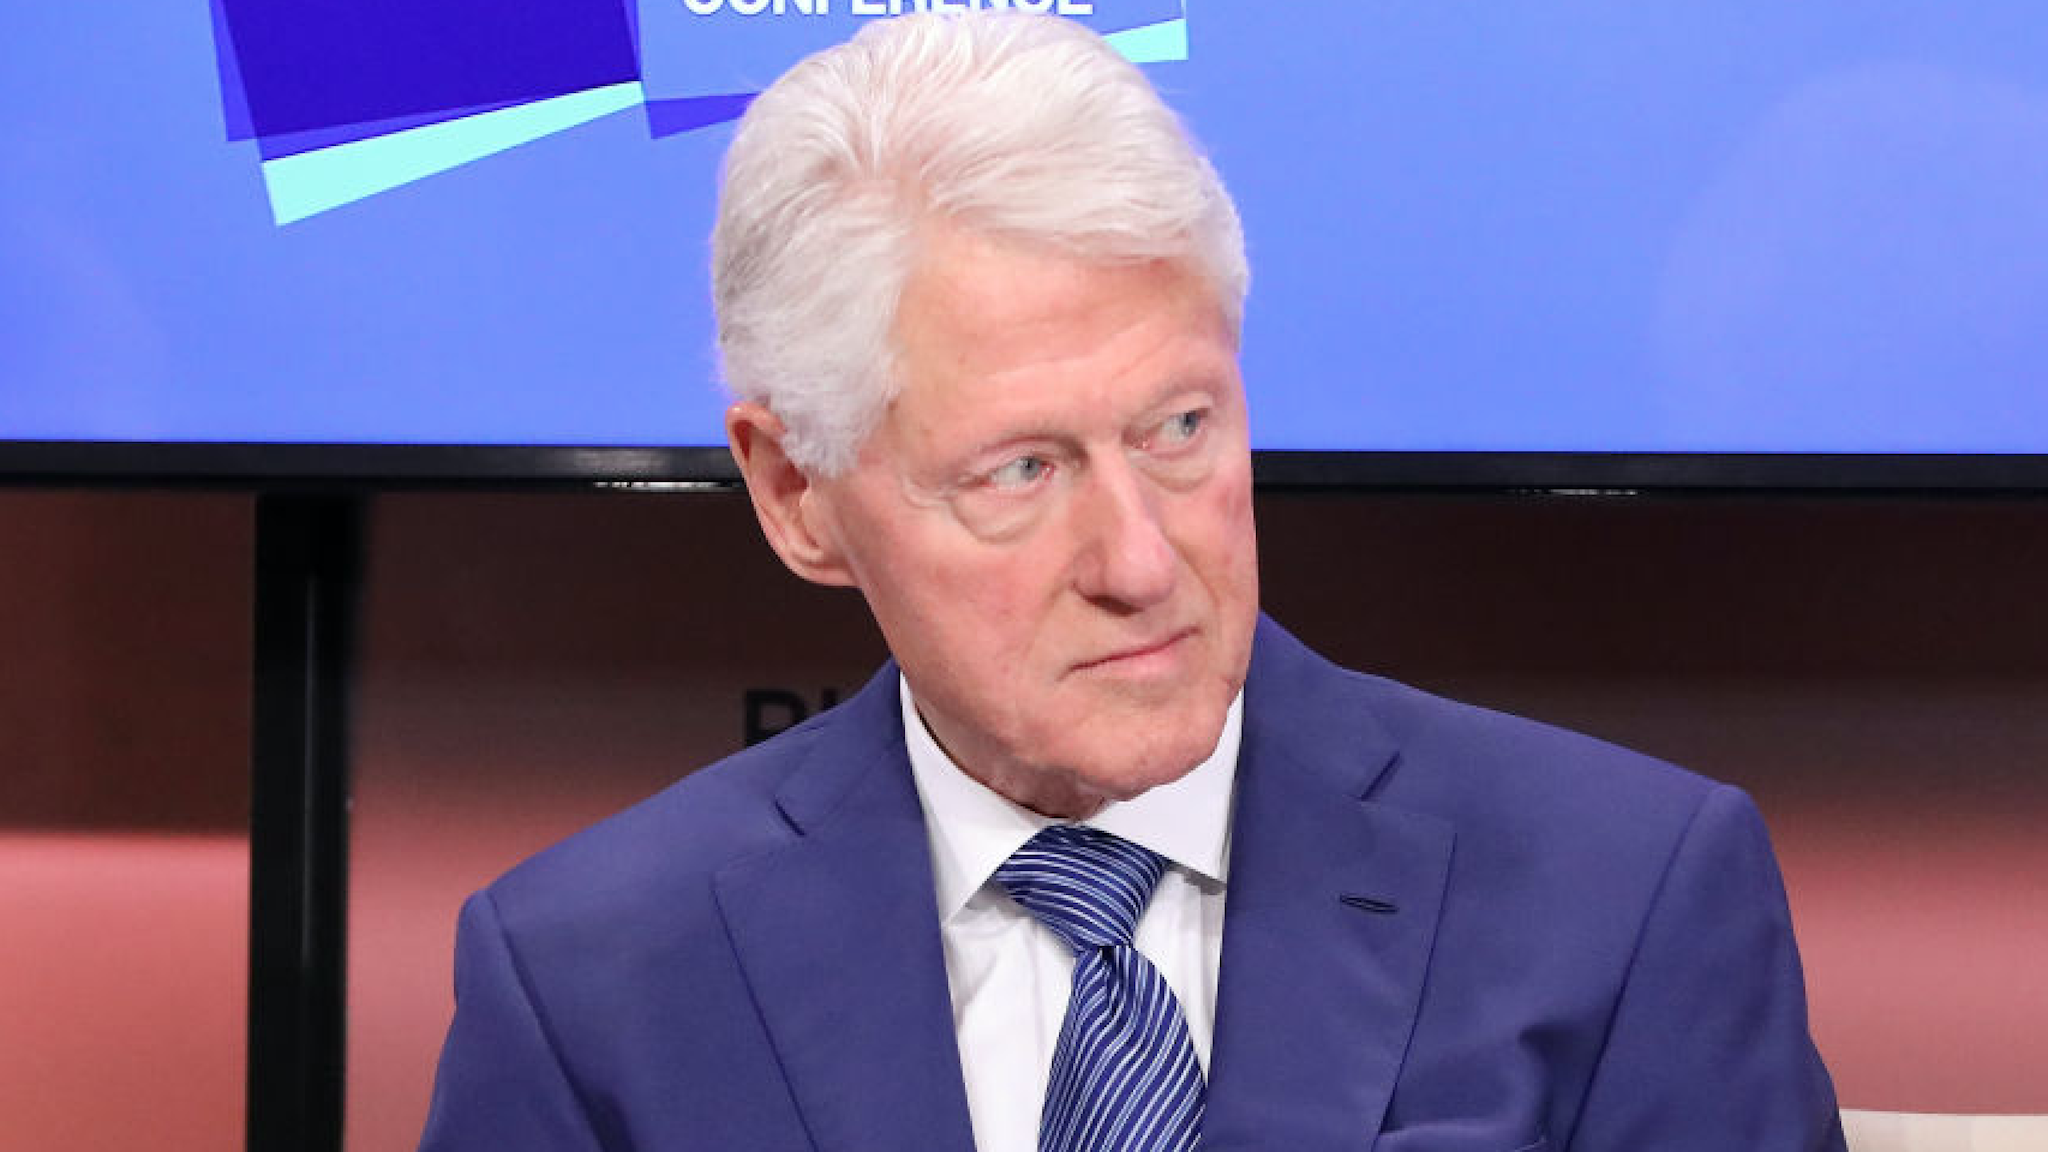 President Bill Clinton speaks during the 2019 Bloomberg Global Business Forum at The Plaza Hotel on September 25, 2019 in New York City.